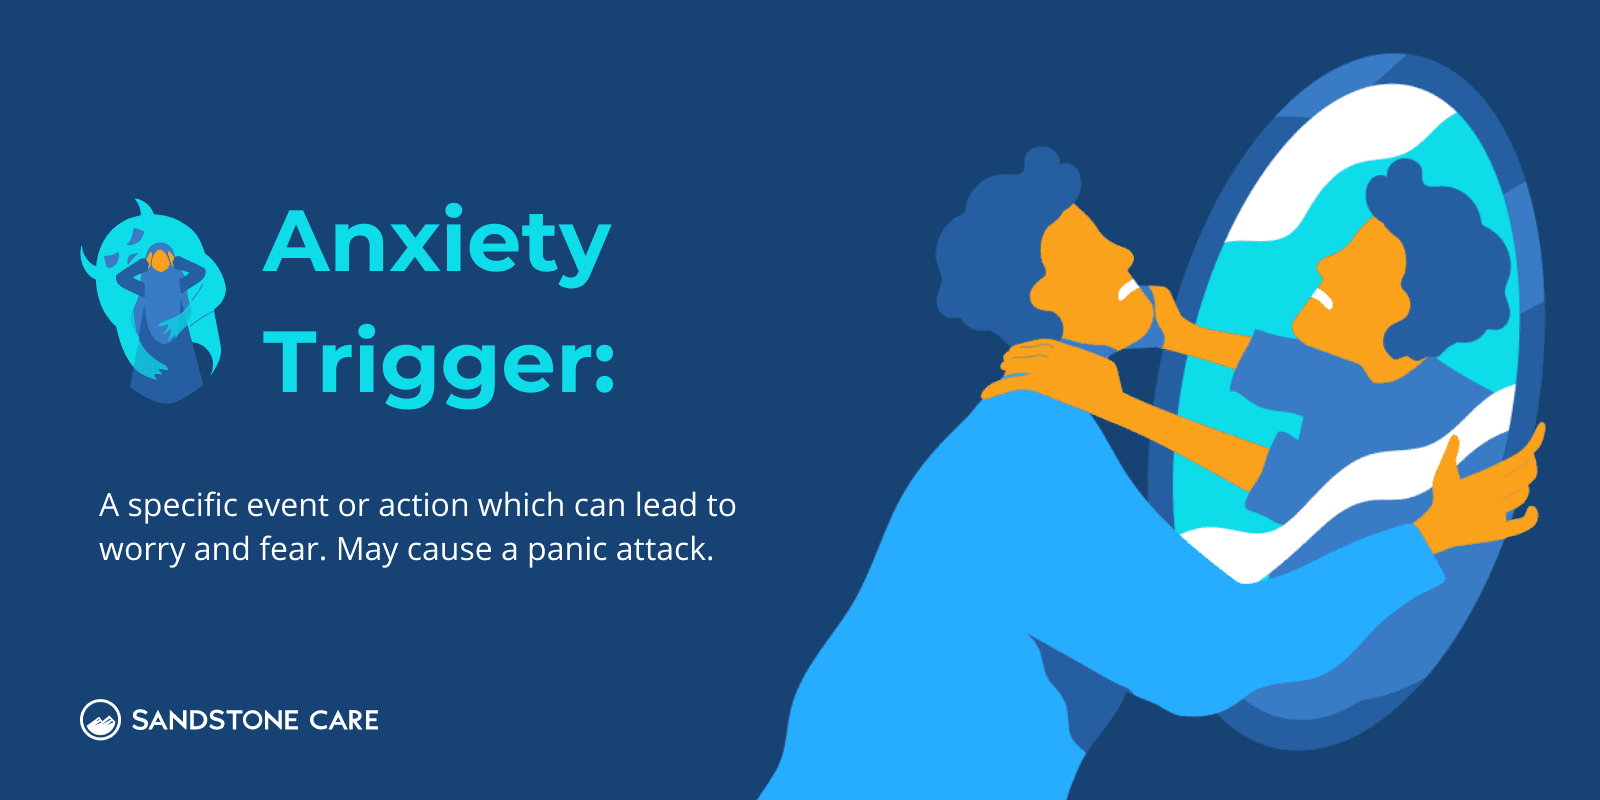 "Anxiety Trigger" definition written next to a digital illustration of a man experiencing anxiety trigger